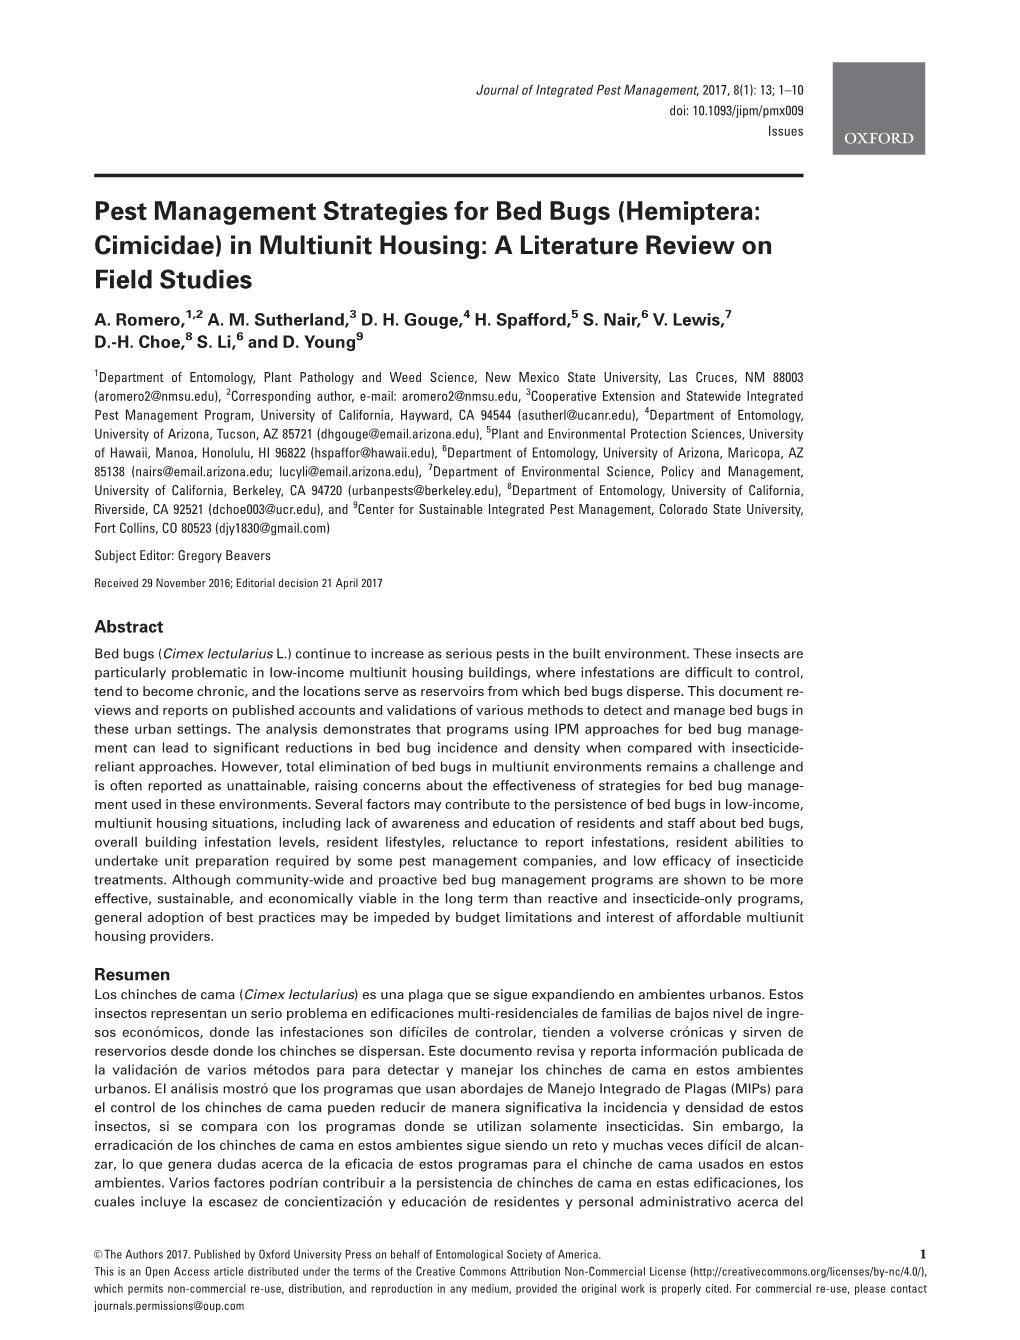 Pest Management Strategies for Bed Bugs (Hemiptera: Cimicidae) in Multiunit Housing: a Literature Review on Field Studies